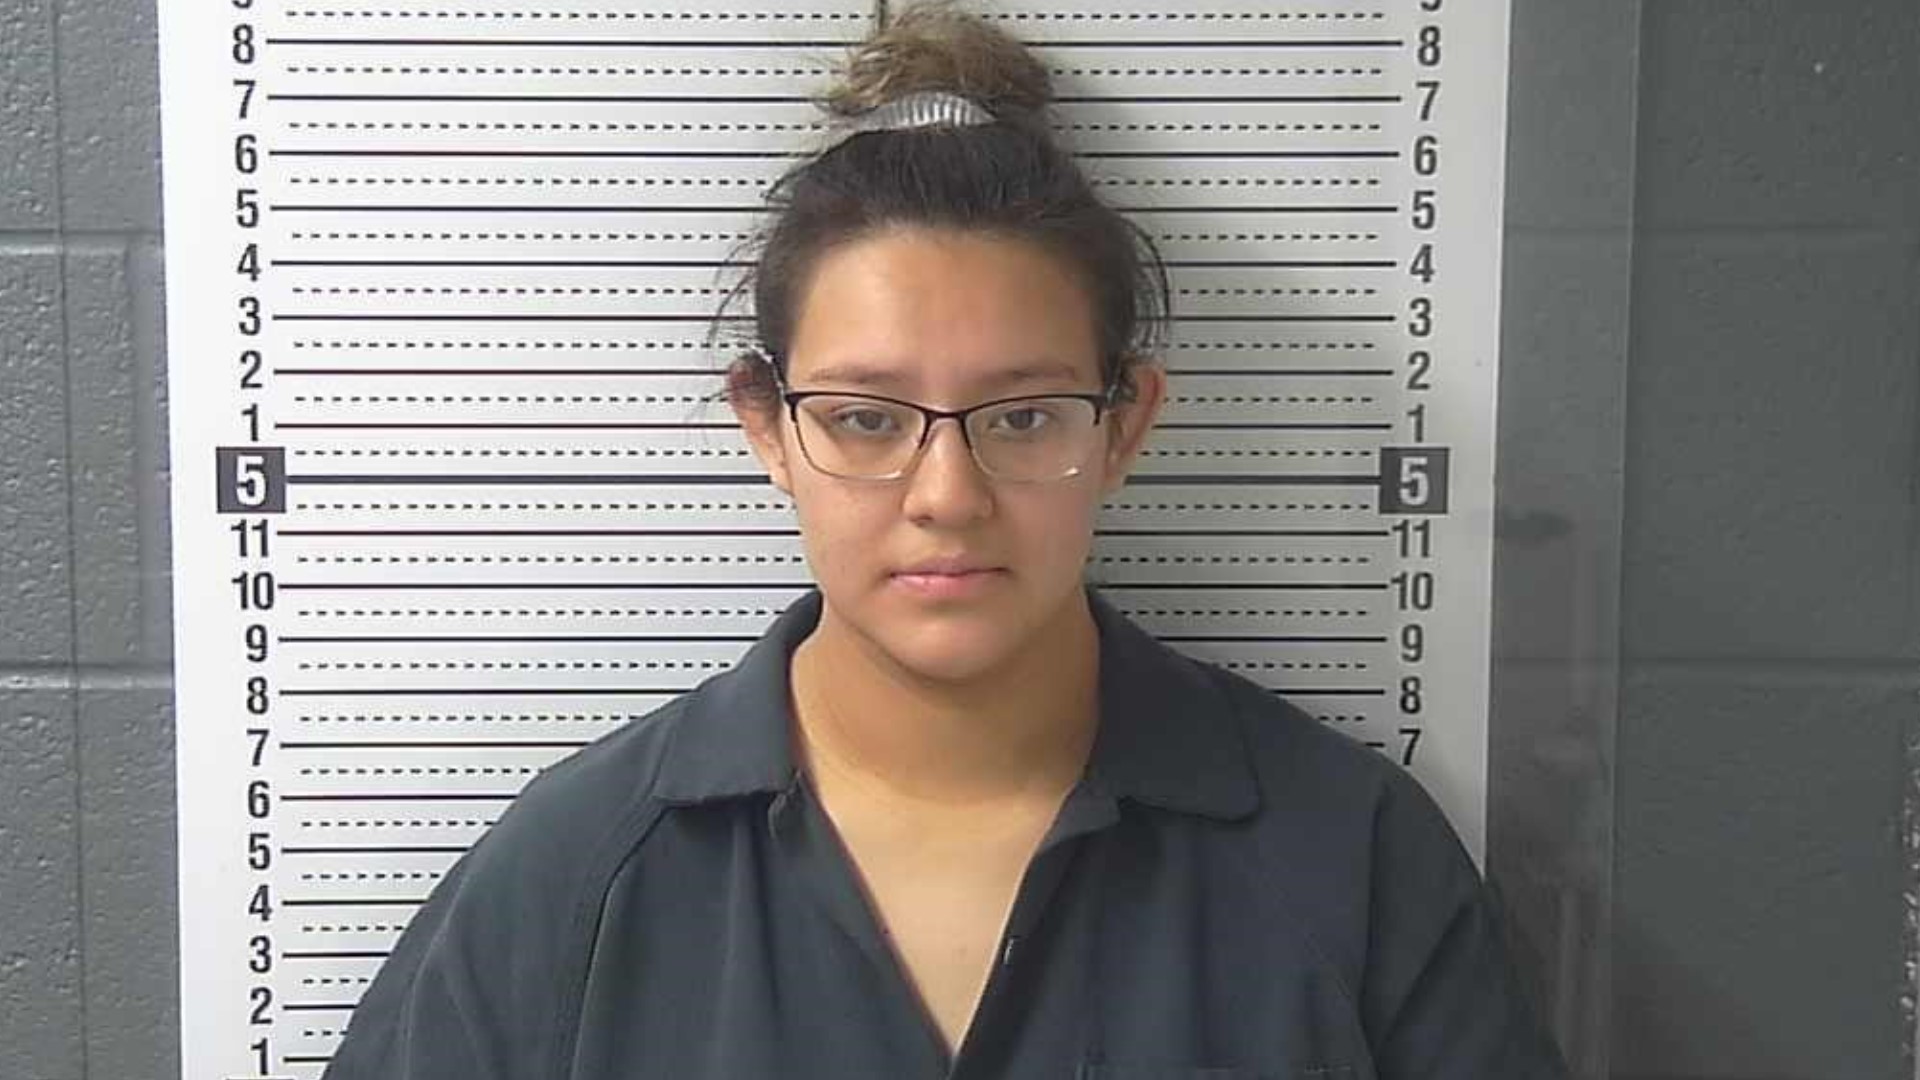 Alexis Avila was caught on surveillance video leaving her baby in a dumpster. She will stay under house arrest, with an ankle monitor, until her trial.